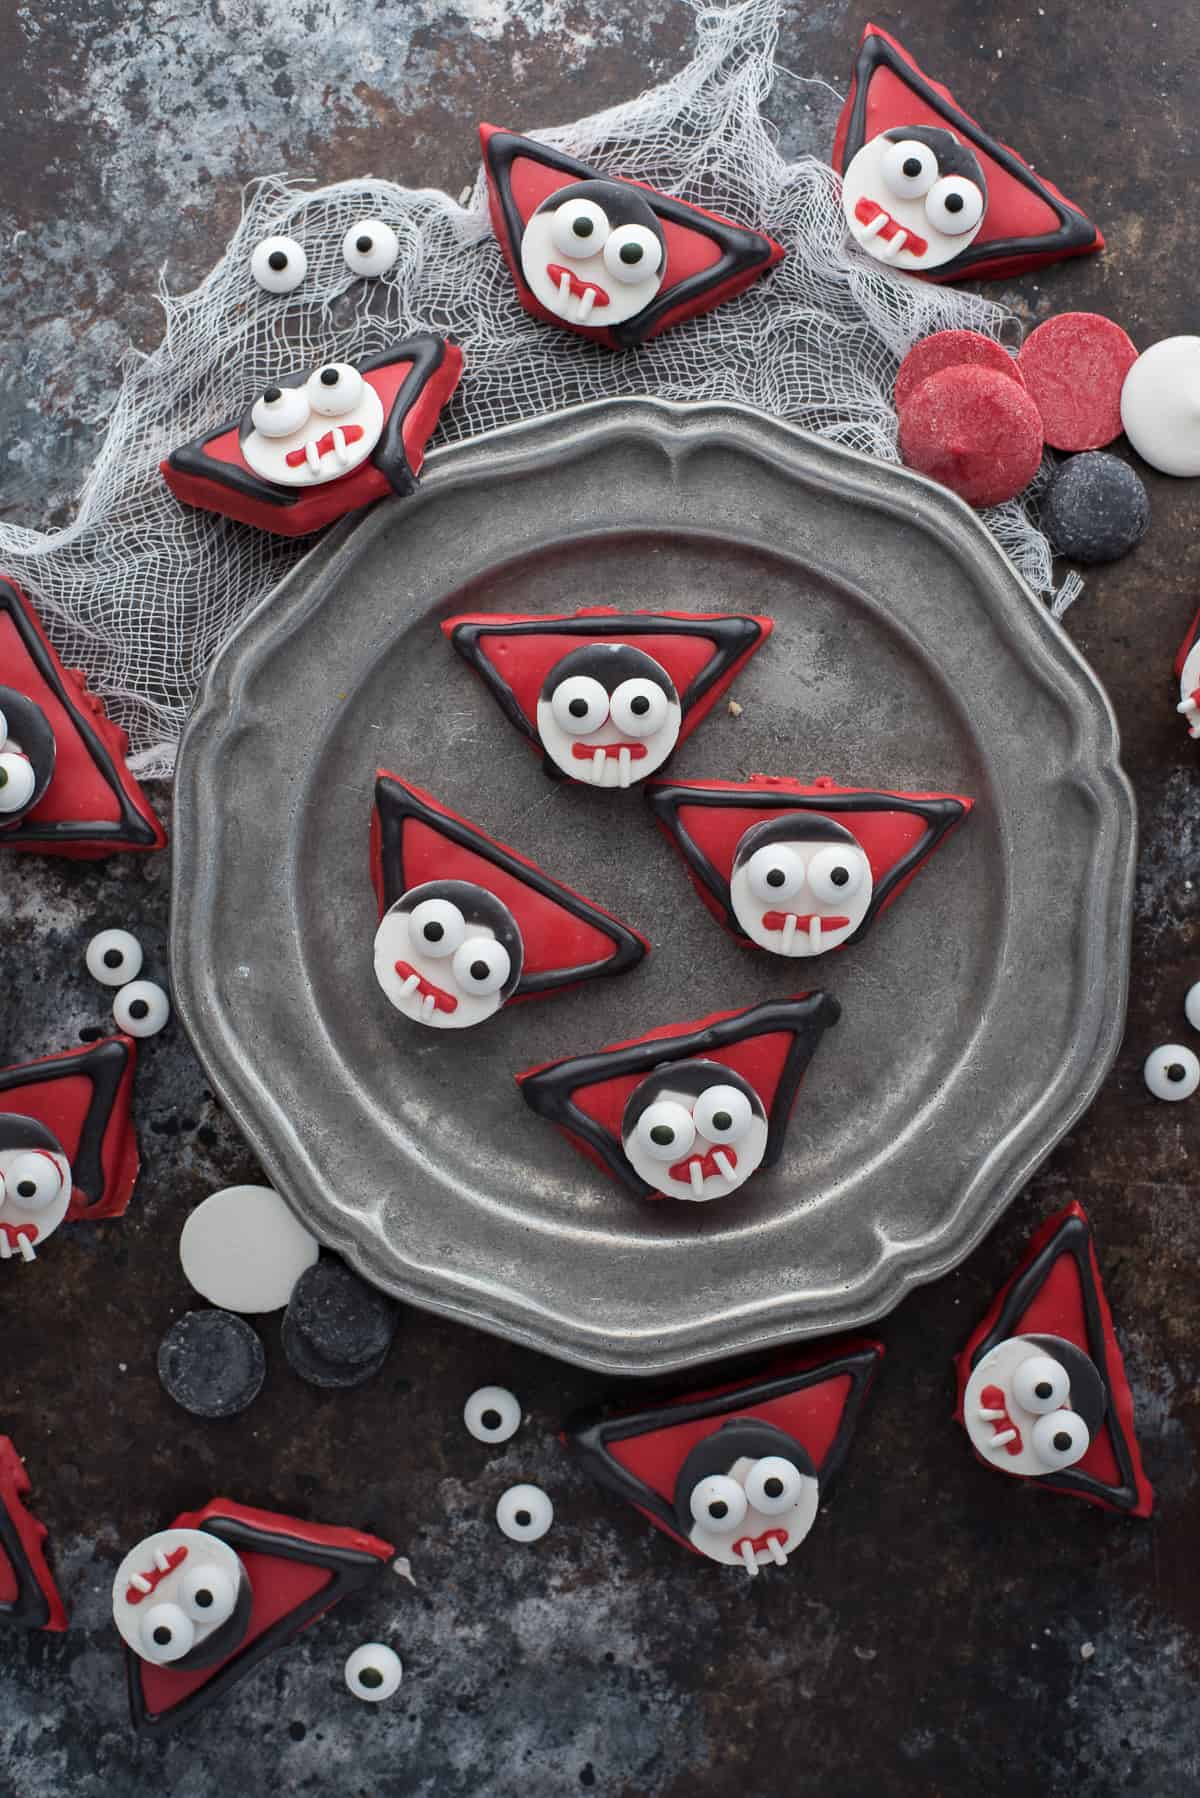 edible vampire treats made out of graham crackers and candy melts displayed on dark background